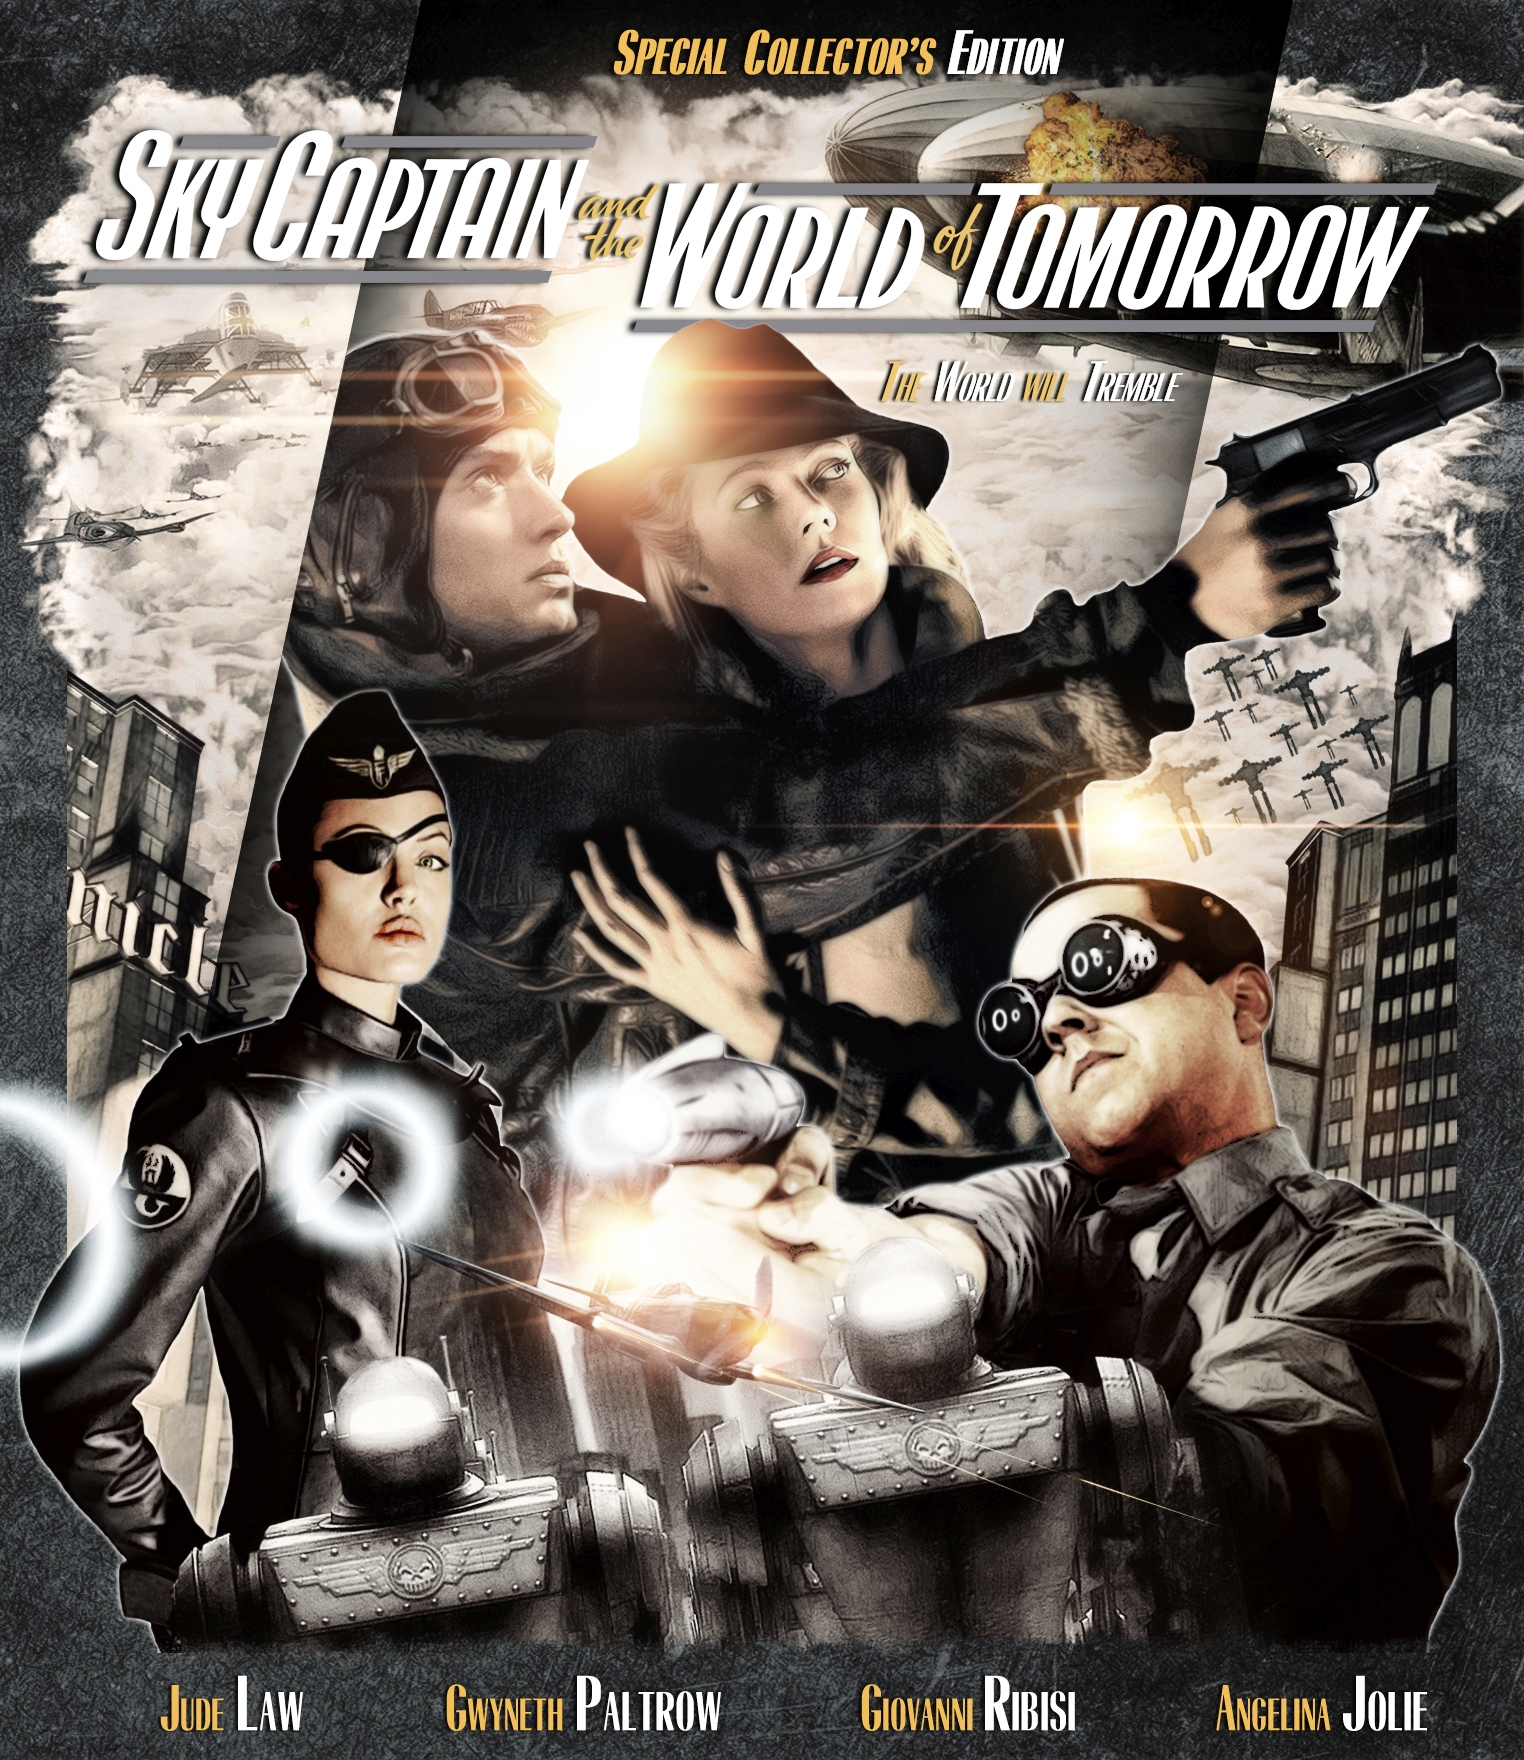 Sky Captain and the World of Tomorrow Poster by Fidi84 on DeviantArt